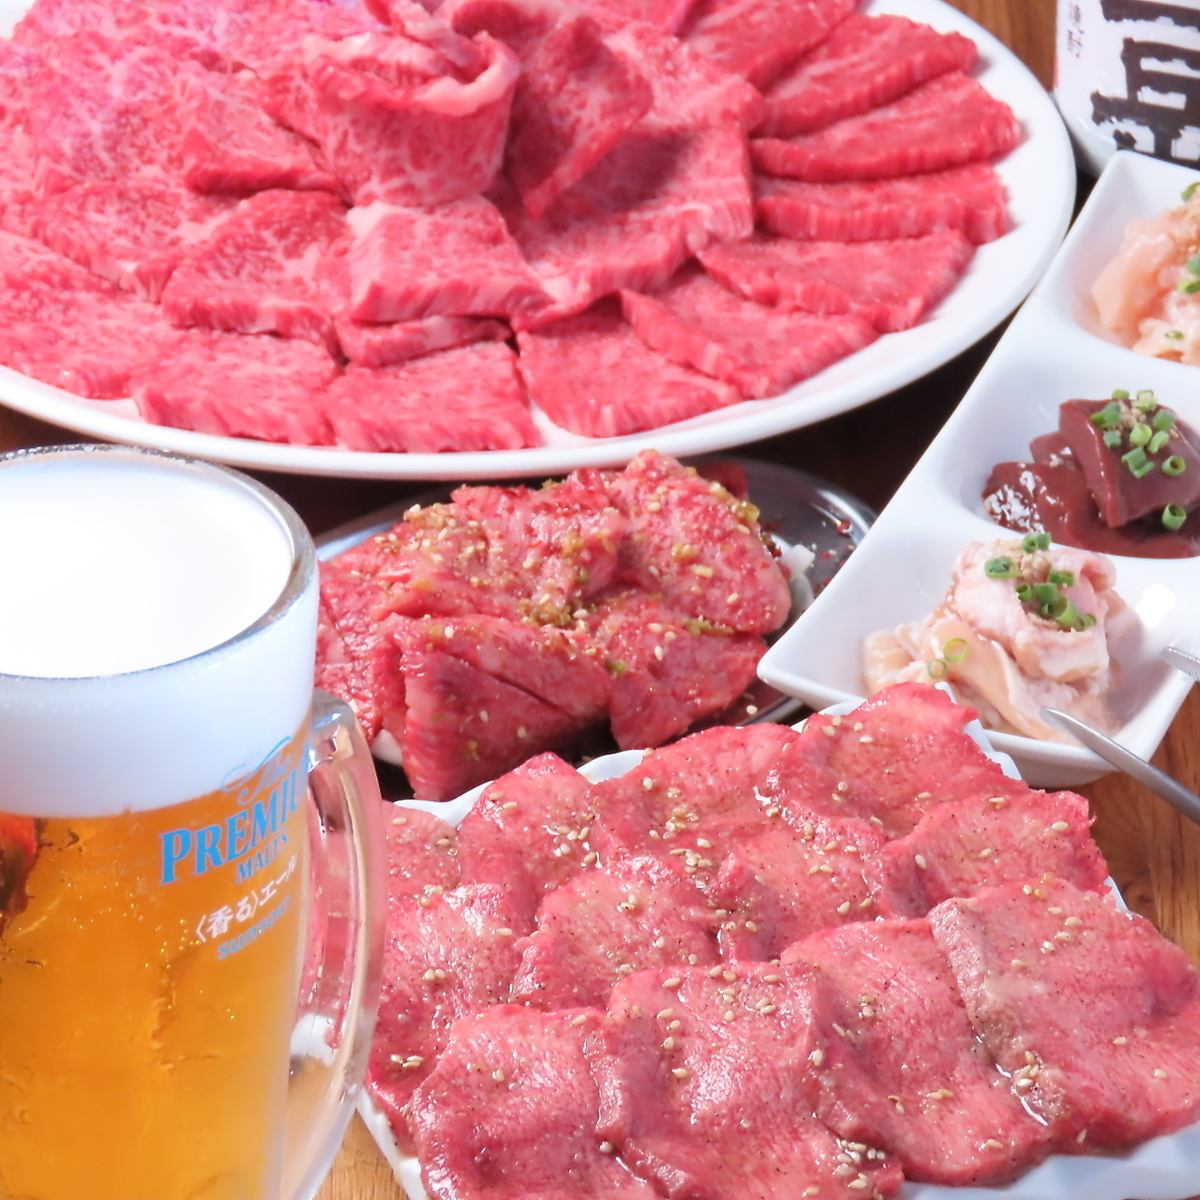 You can enjoy high-quality meat and aged meat at a reasonable price.